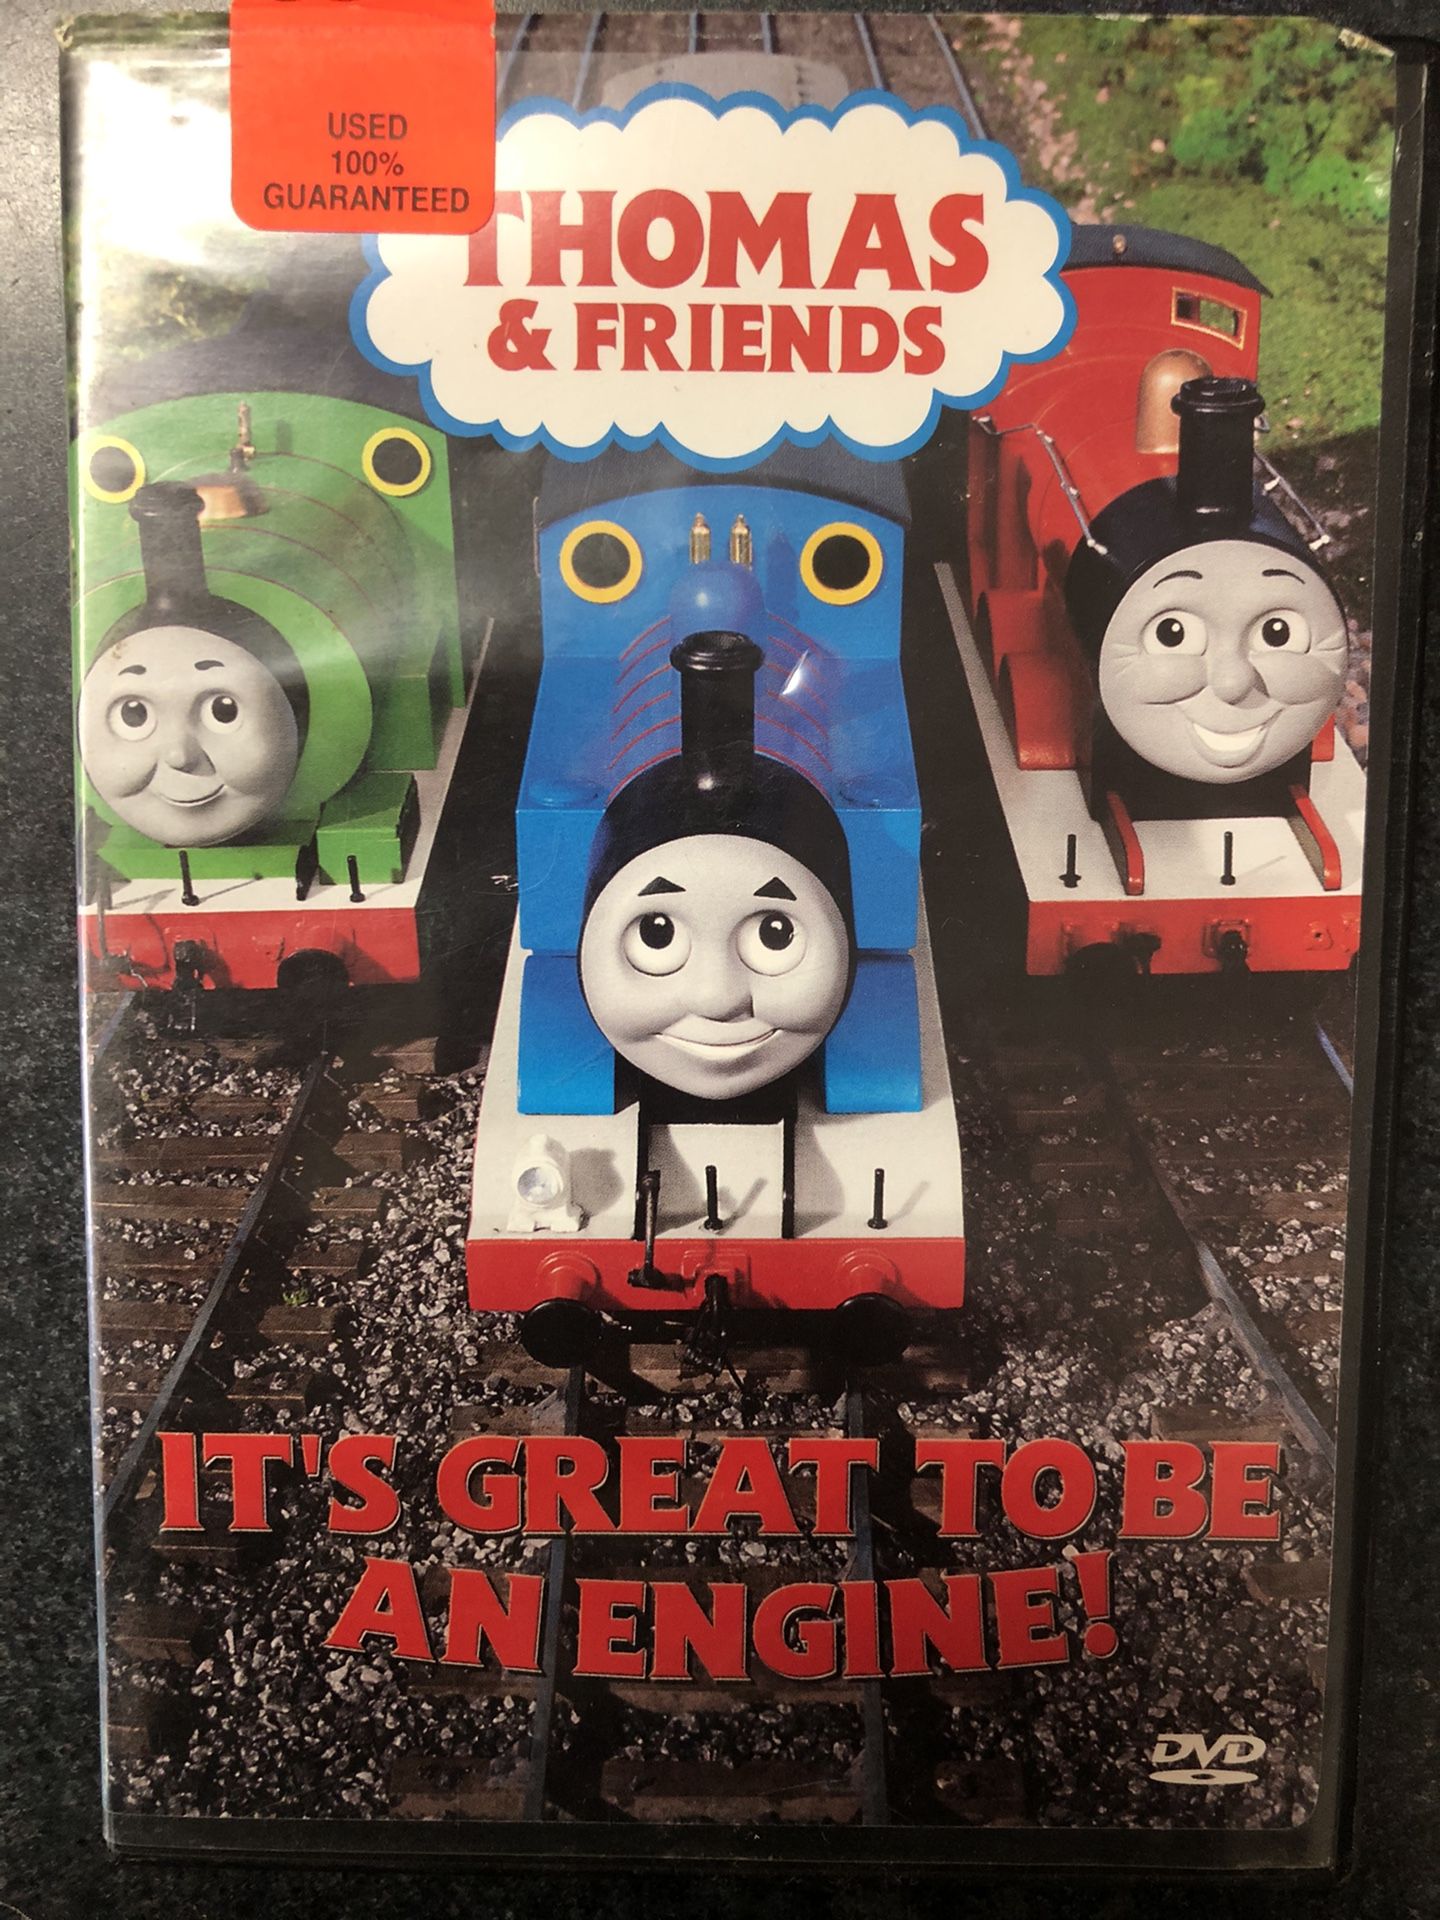 Thomas and Friends It’s Great To Be An Engine DVD